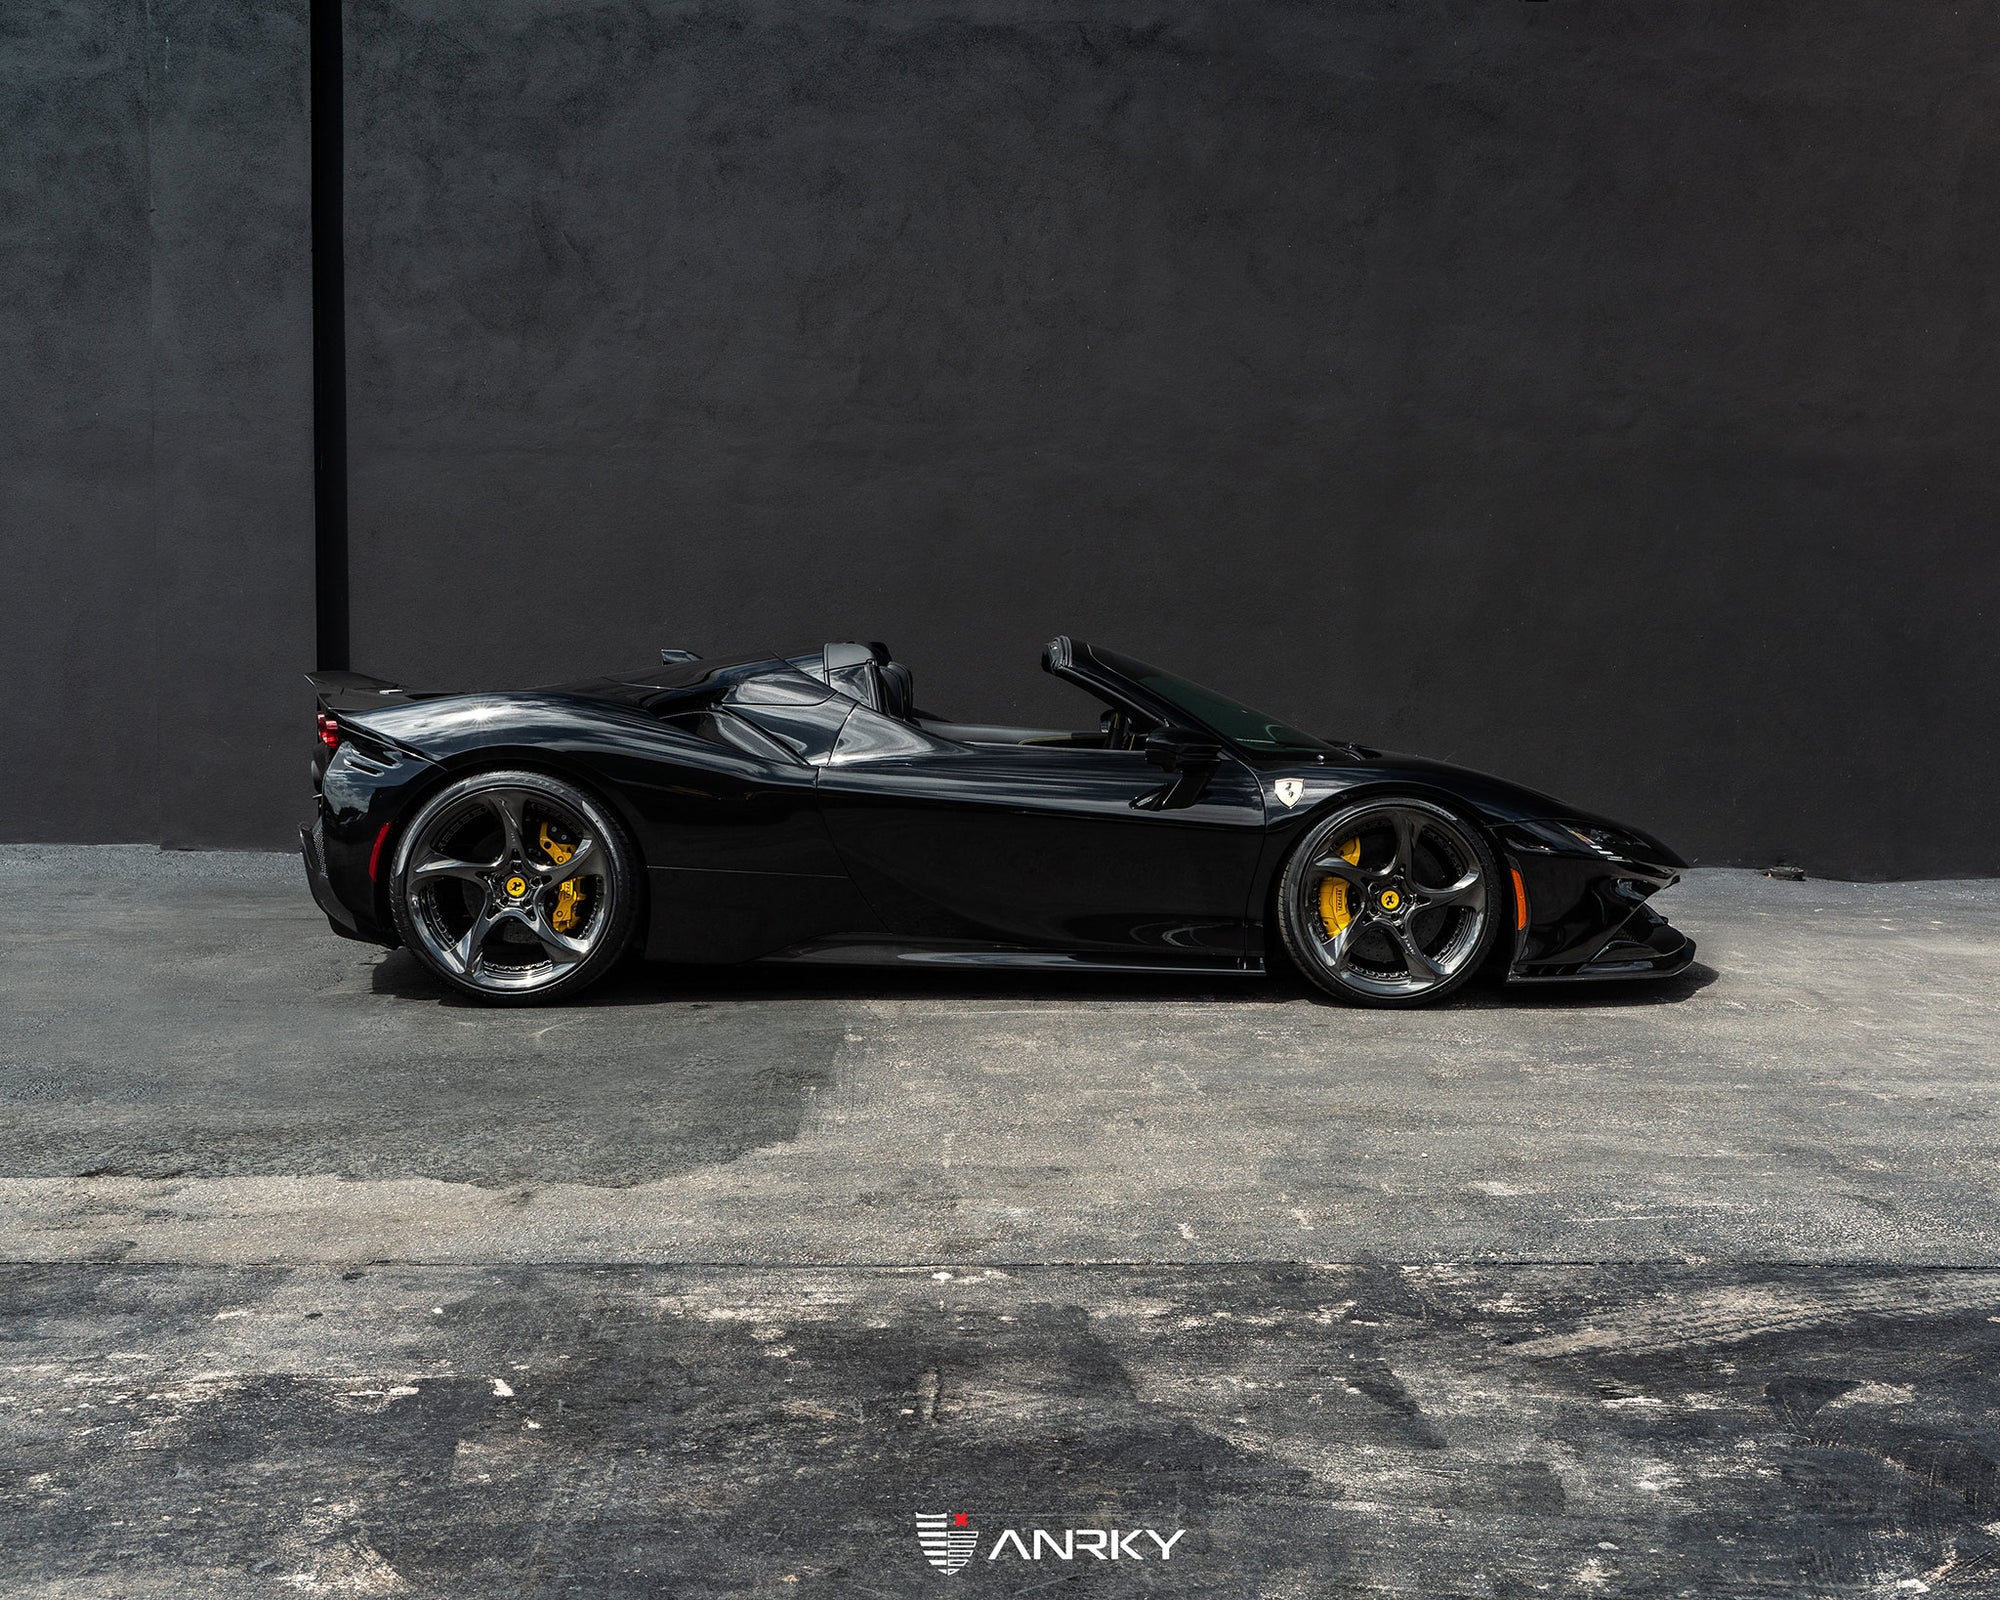 Ferrari SF90 with Anrky XR-205 wheels in 21 inch in front and 22 inch in the rear.